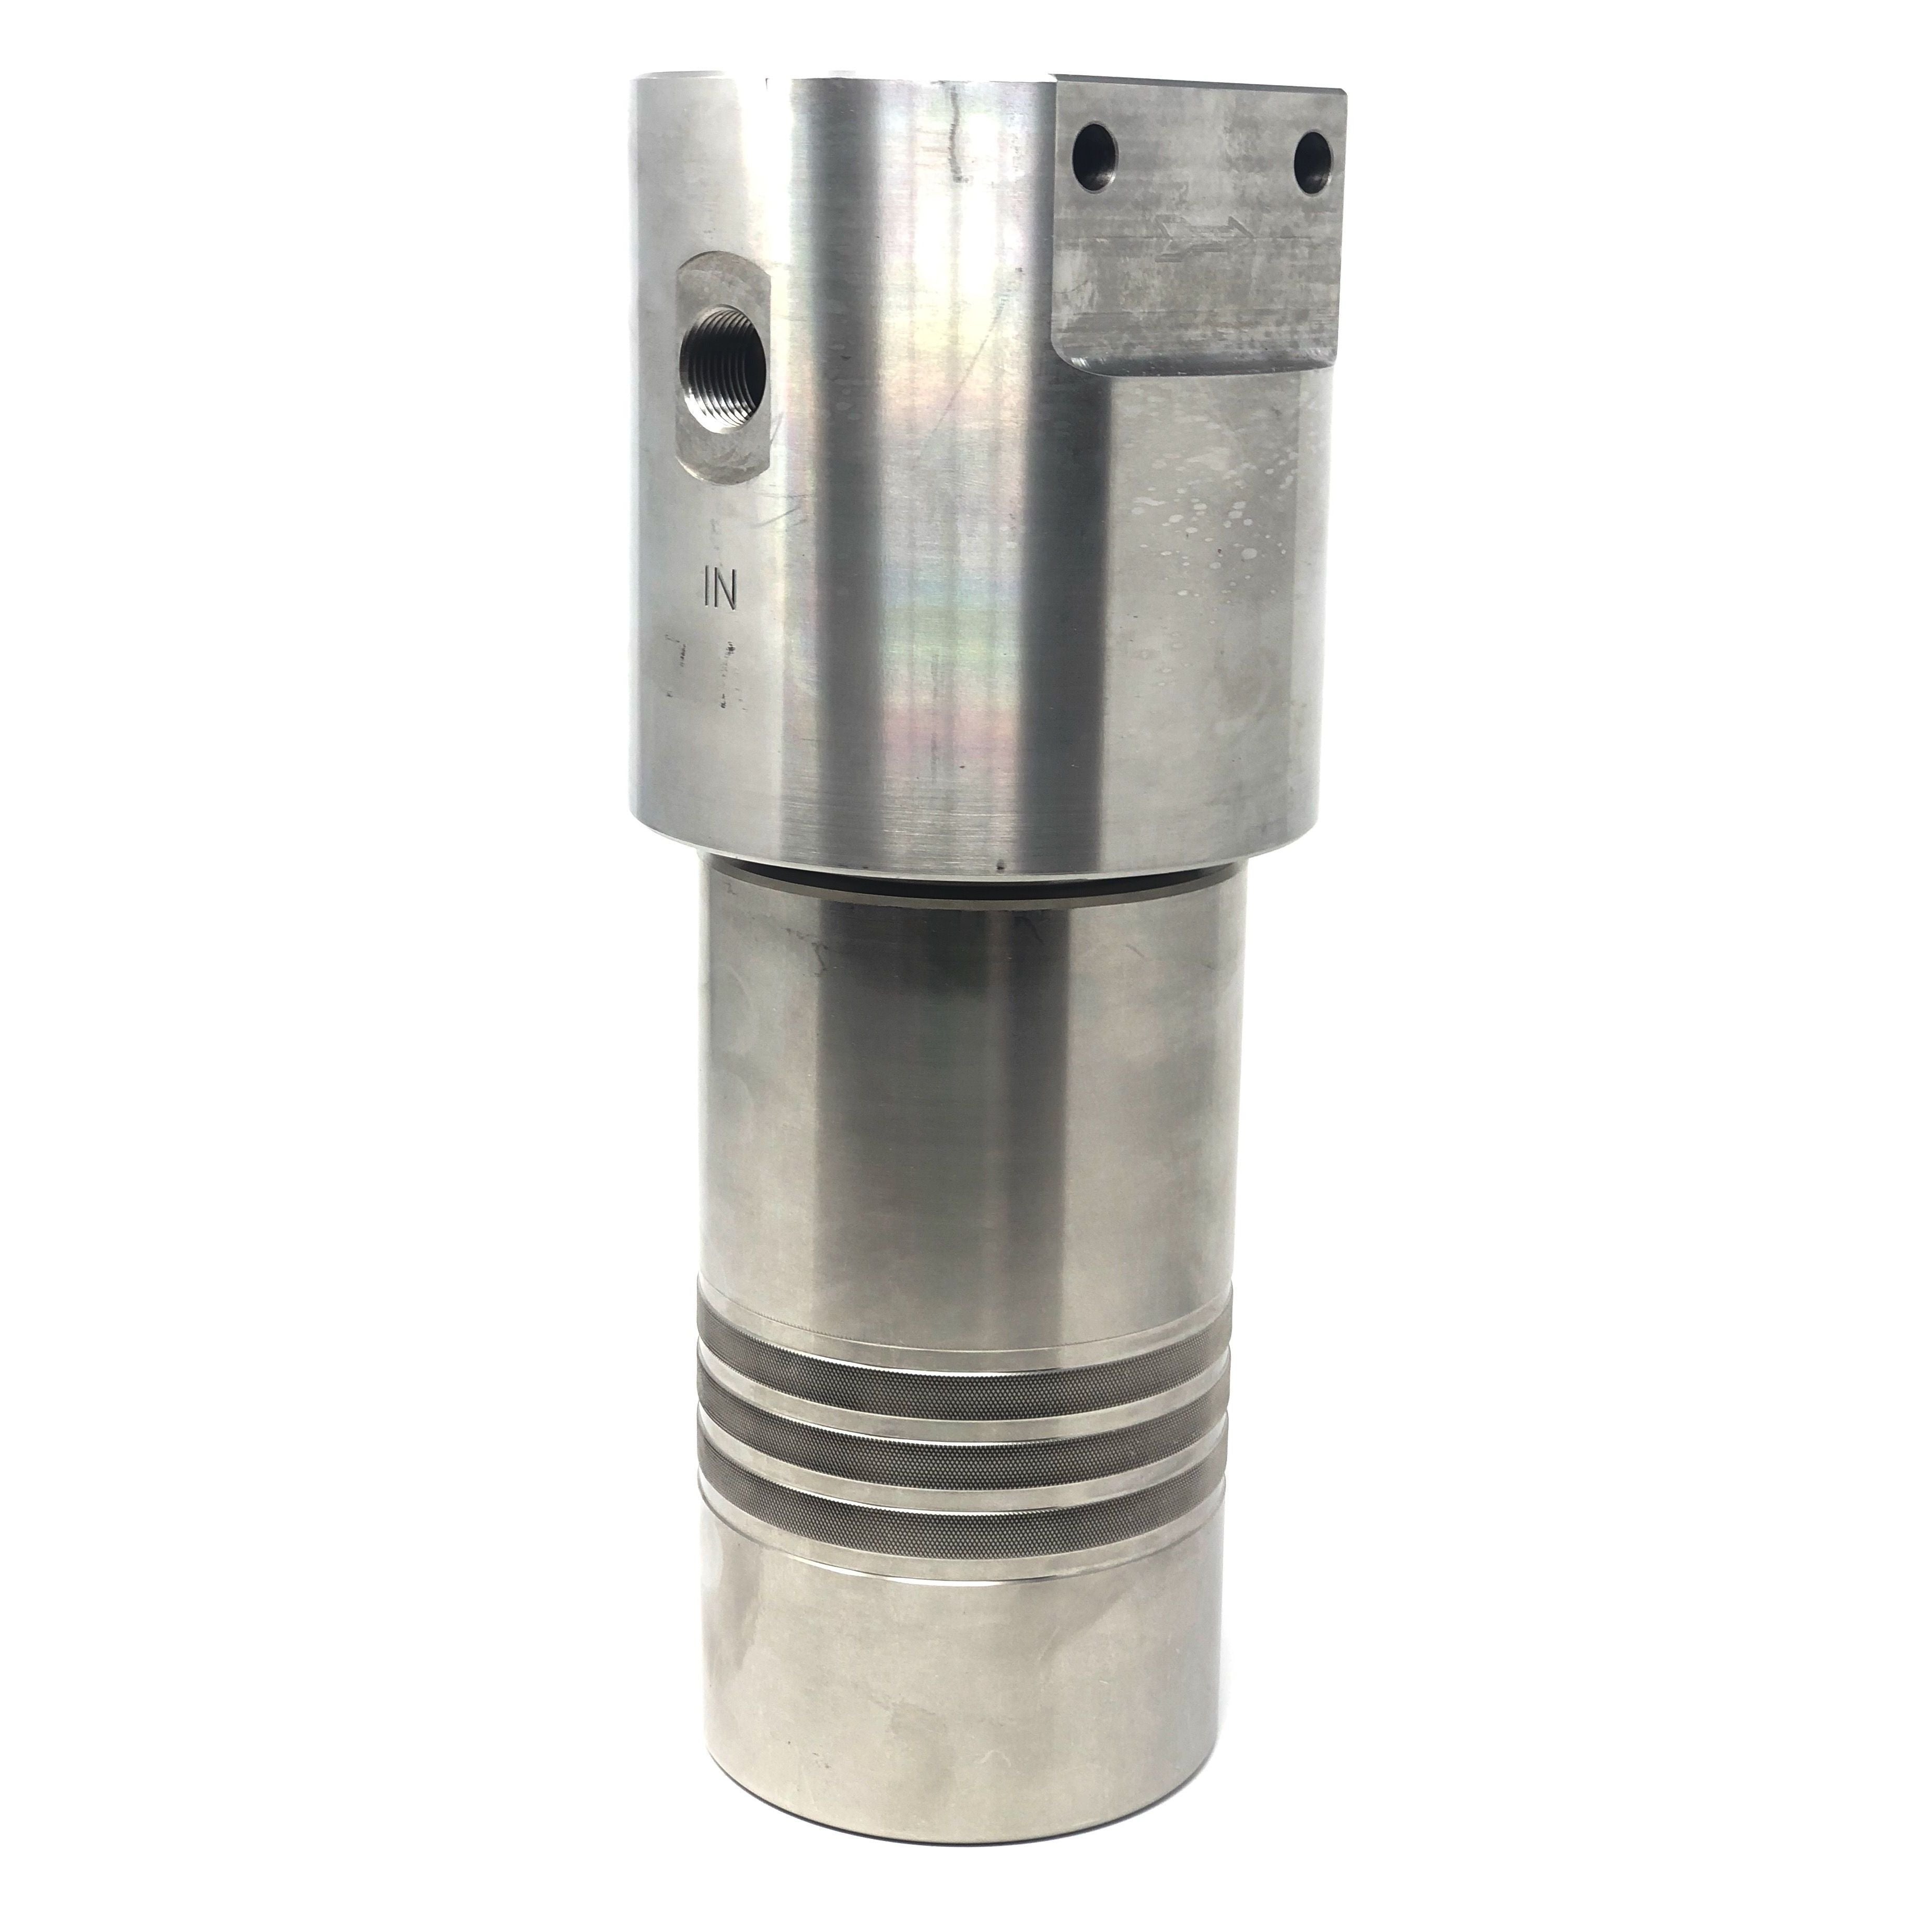 52S-248S-18SEN : Chase Ultra High Pressure Inline Filter, 10000psi, #8 SAE (1/2"), 18 Micron, With Visual Indicator, No Bypass